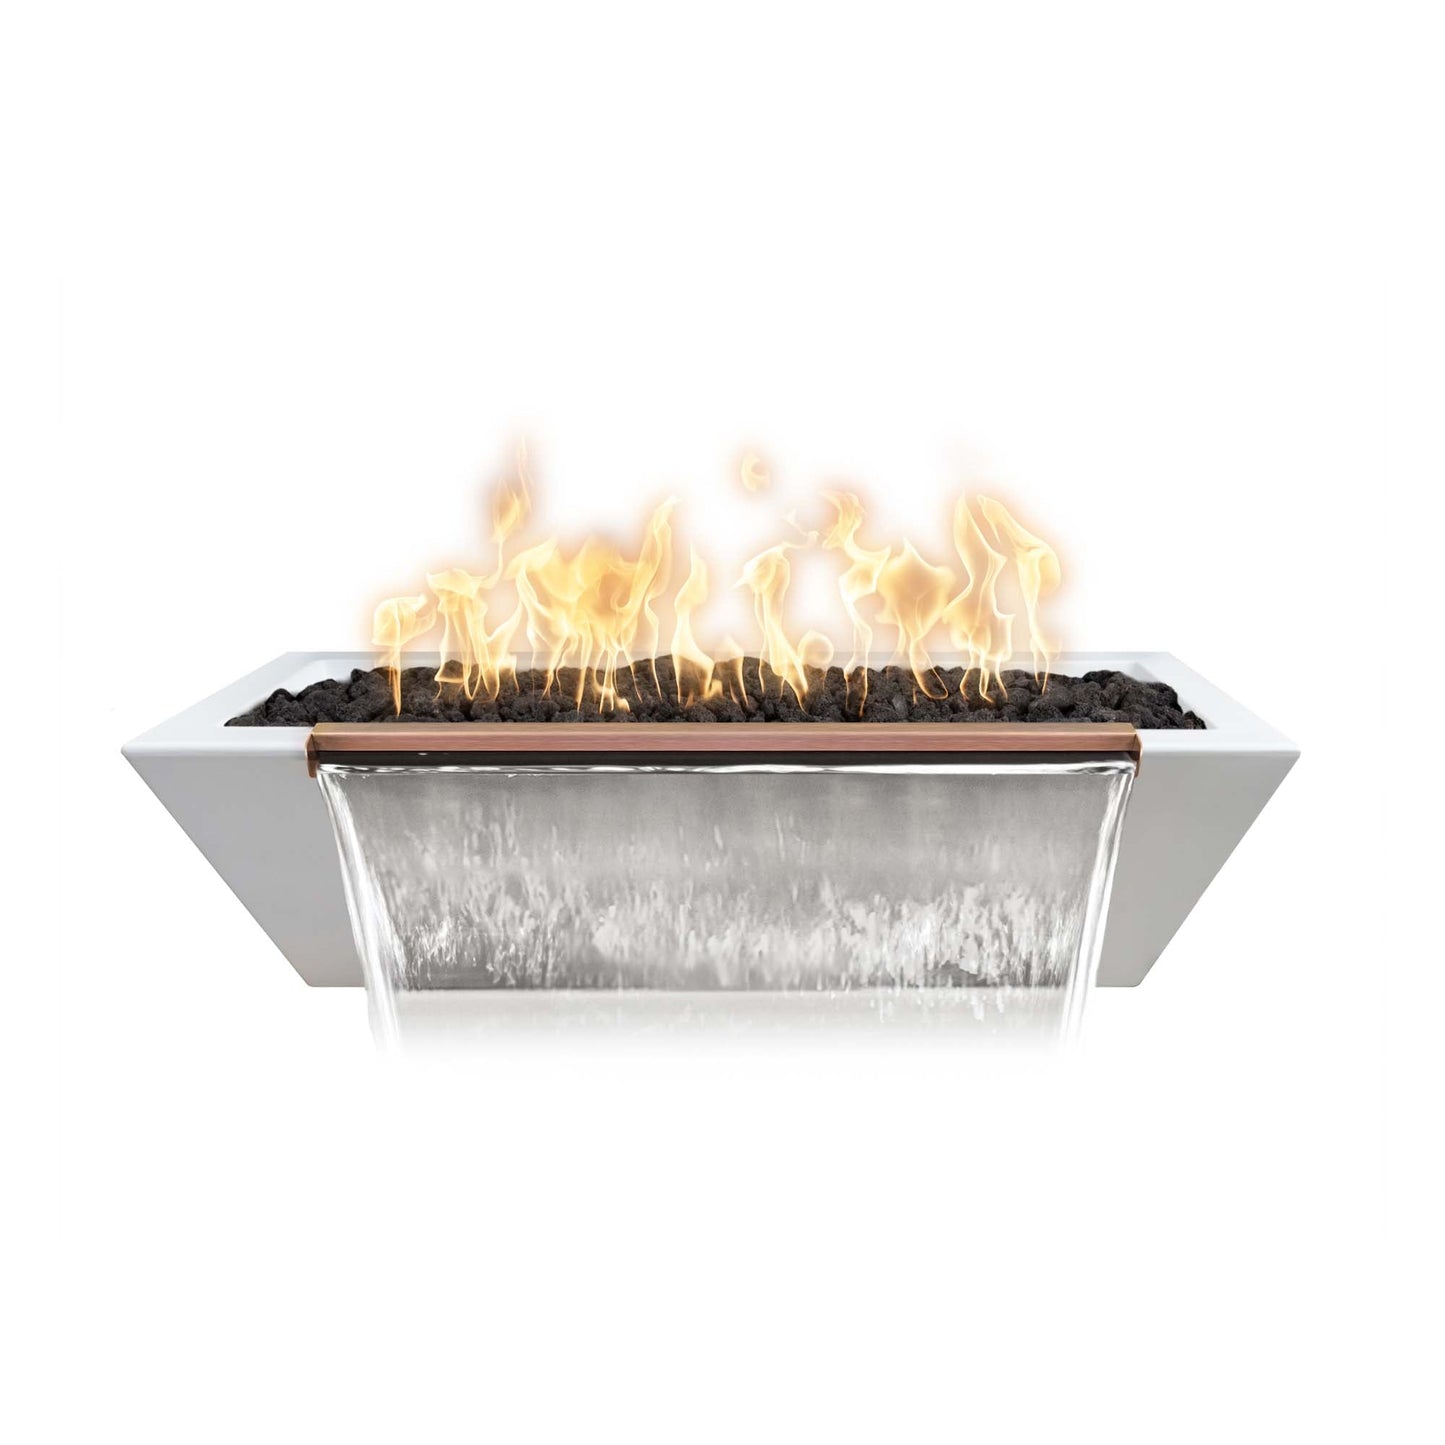 The Outdoor Plus Linear Maya 60" Vanilla GFRC Concrete Natural Gas Fire & Water Bowl with 12V Electronic Ignition